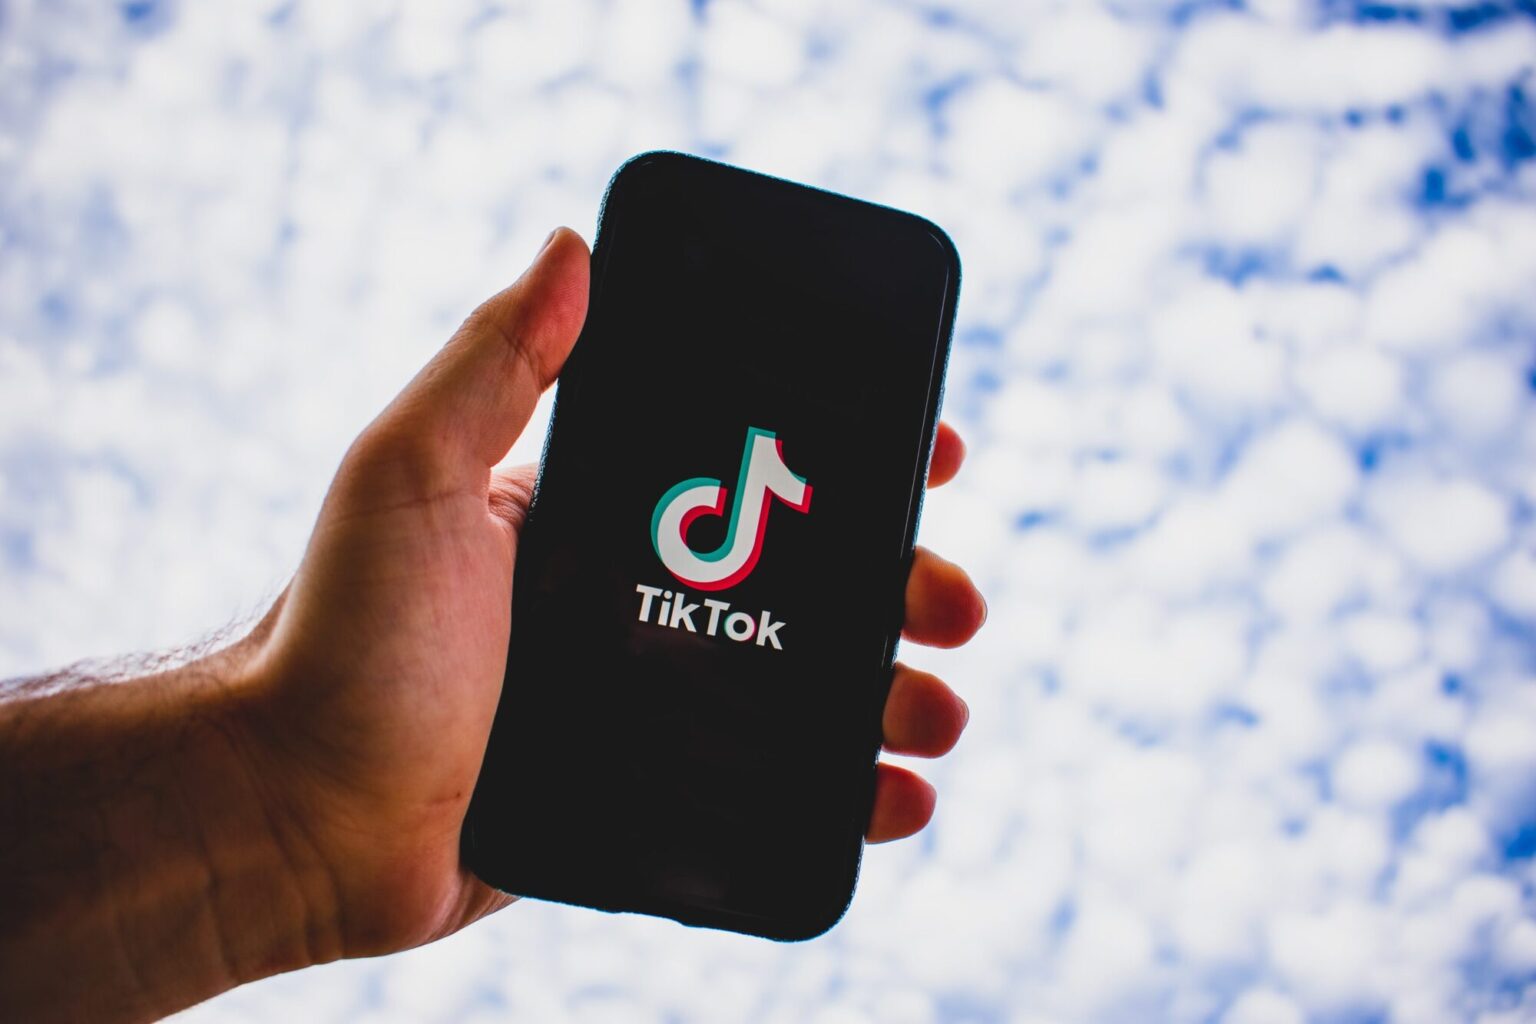 Have you heard about the "energy" TikTok trend? This viral trend has become the most ridiculous one yet! Check out these hilarious TikTok memes.